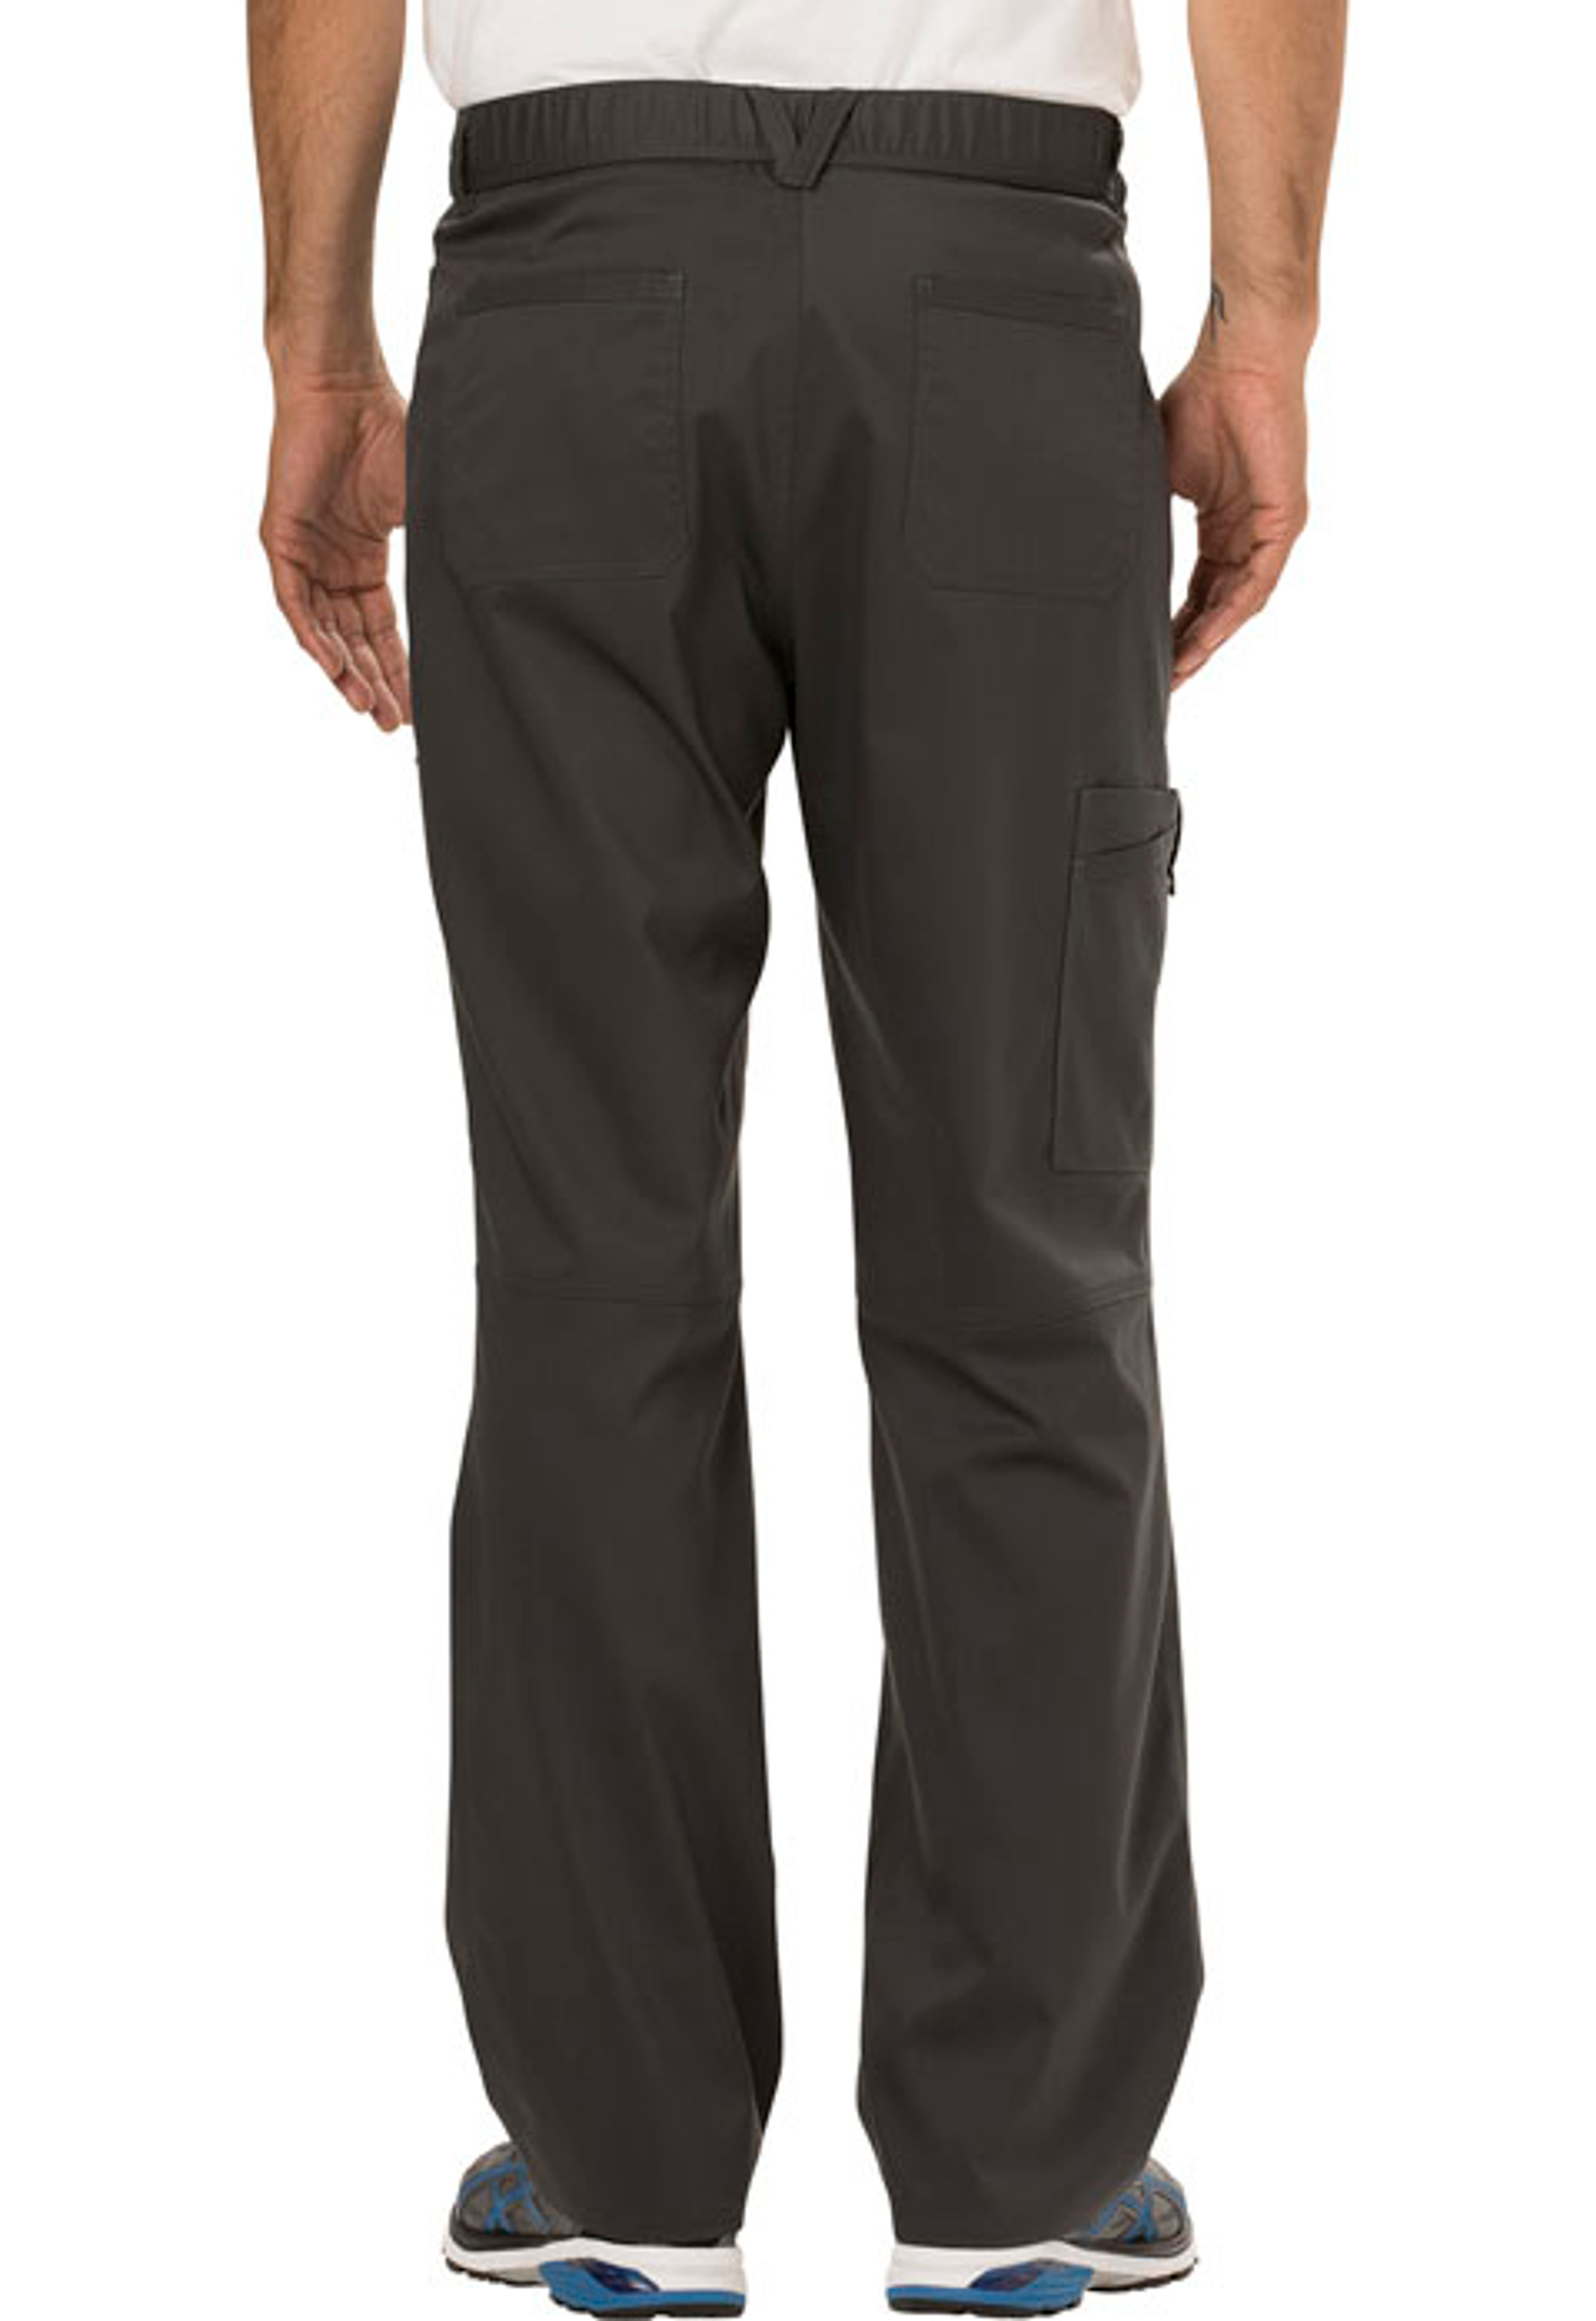 Fly Front Cargo Pant #WW140 Cherokee Workwear